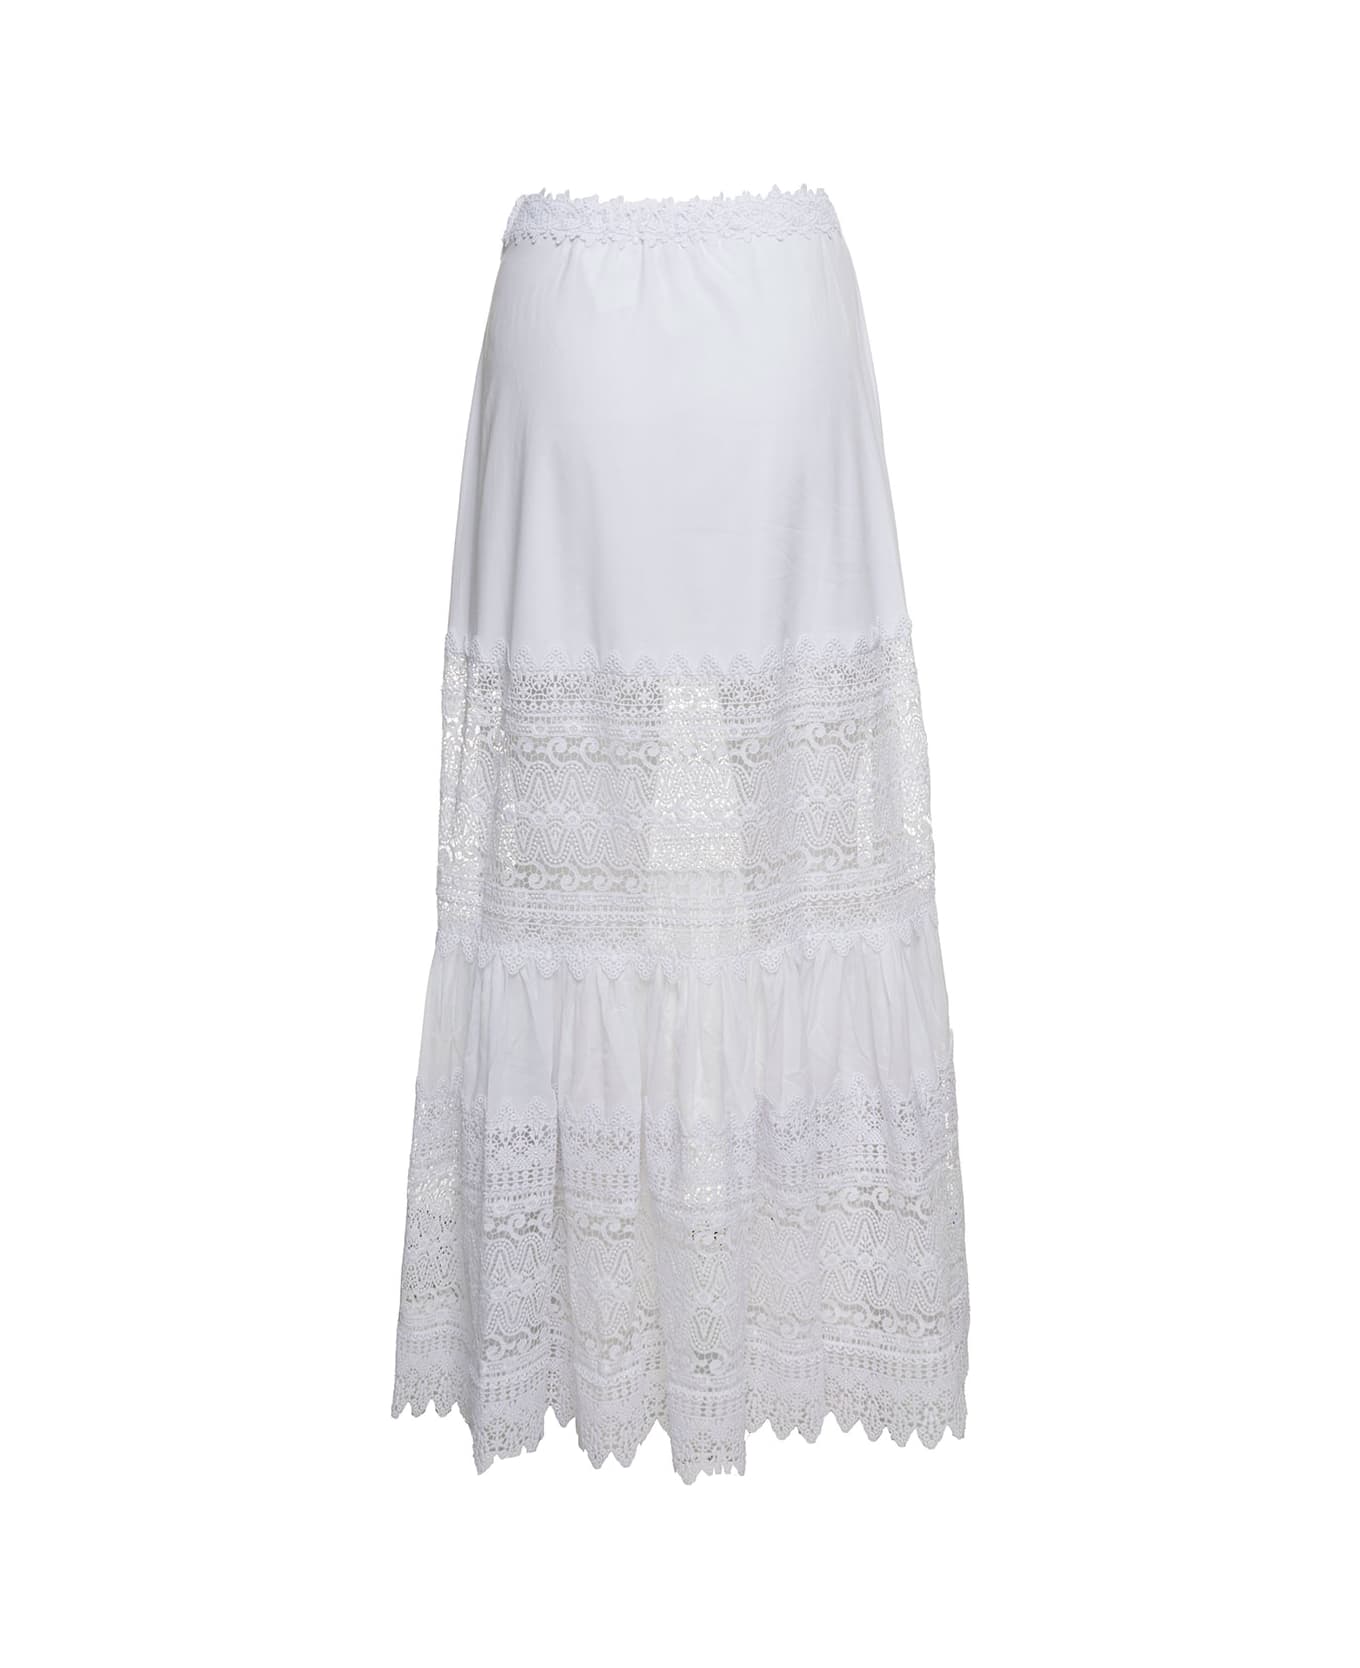 Charo Ruiz 'viola' White Flounced Skirt With Lace Inserts In Cotton Blend Woman - White